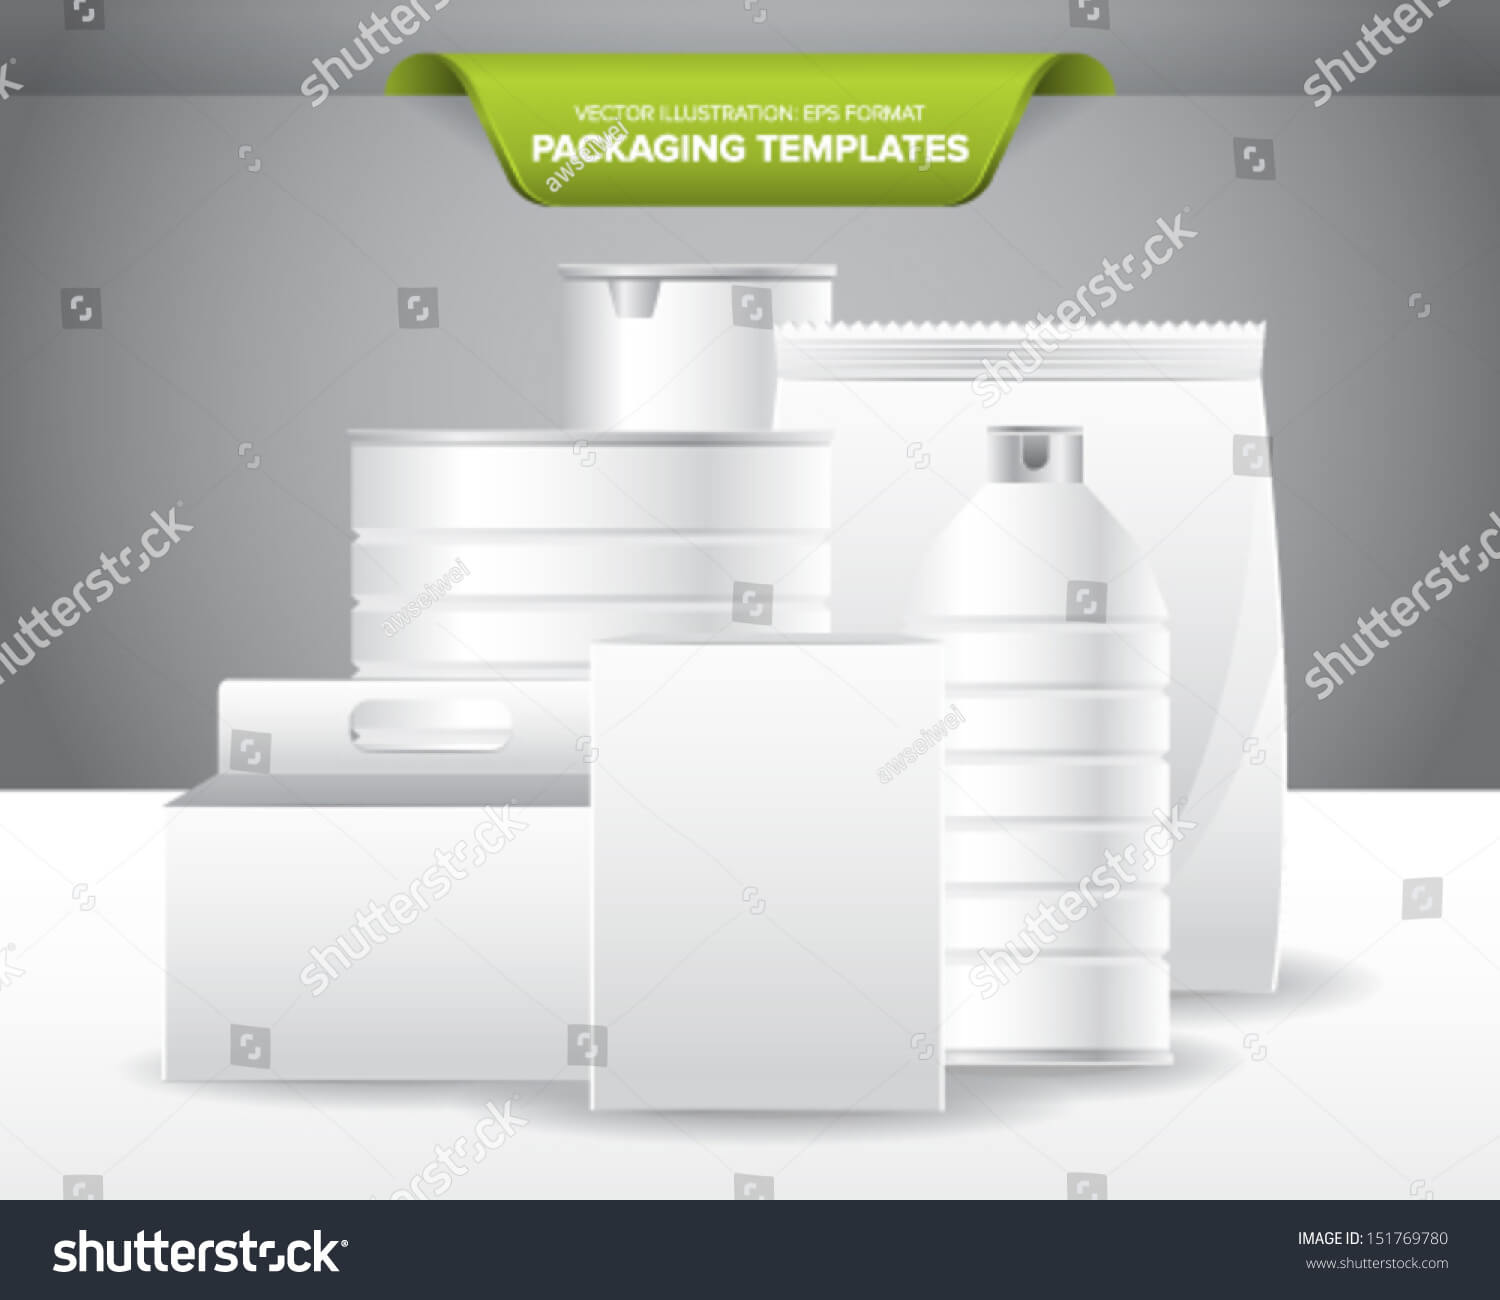 Set Empty Blank Packaging Templates Food Stock Image Throughout Blank Packaging Templates